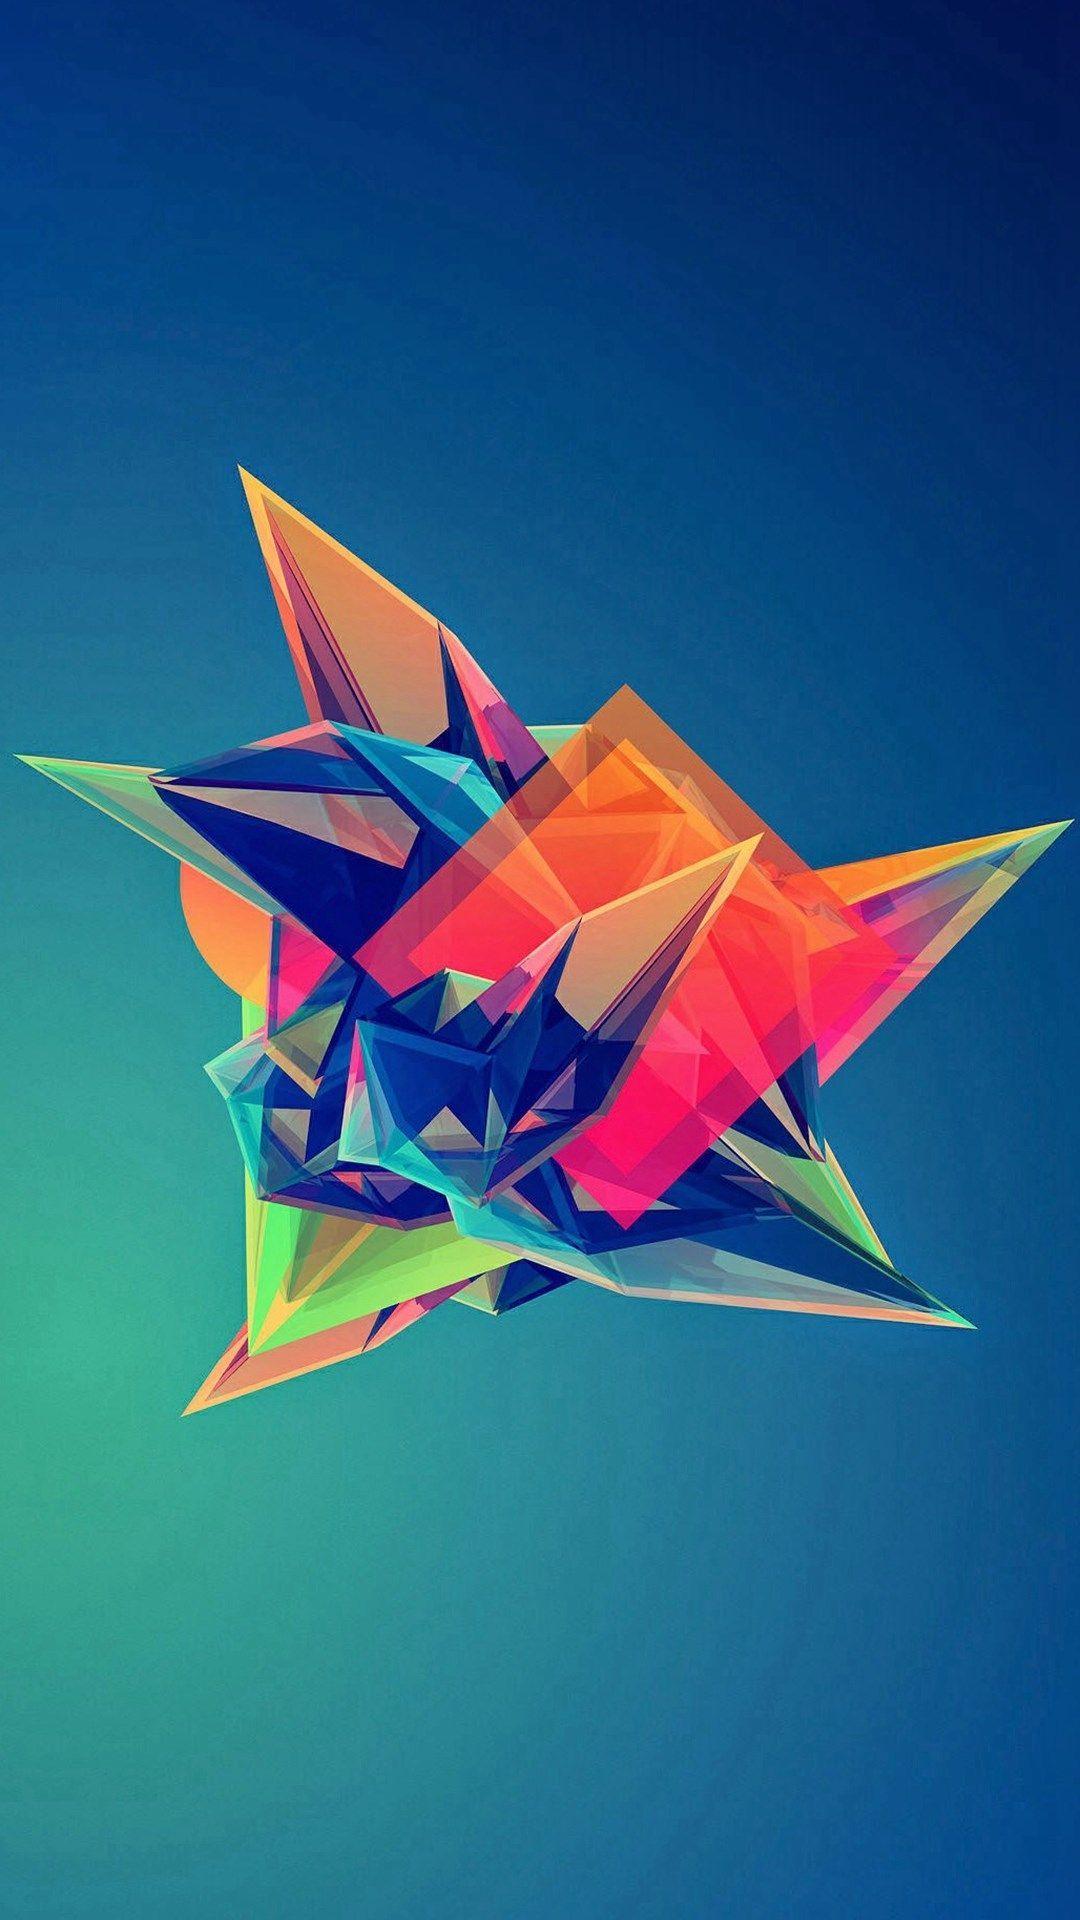 colorful cool abstract polygonal shape iphone 6 plus wallpaper